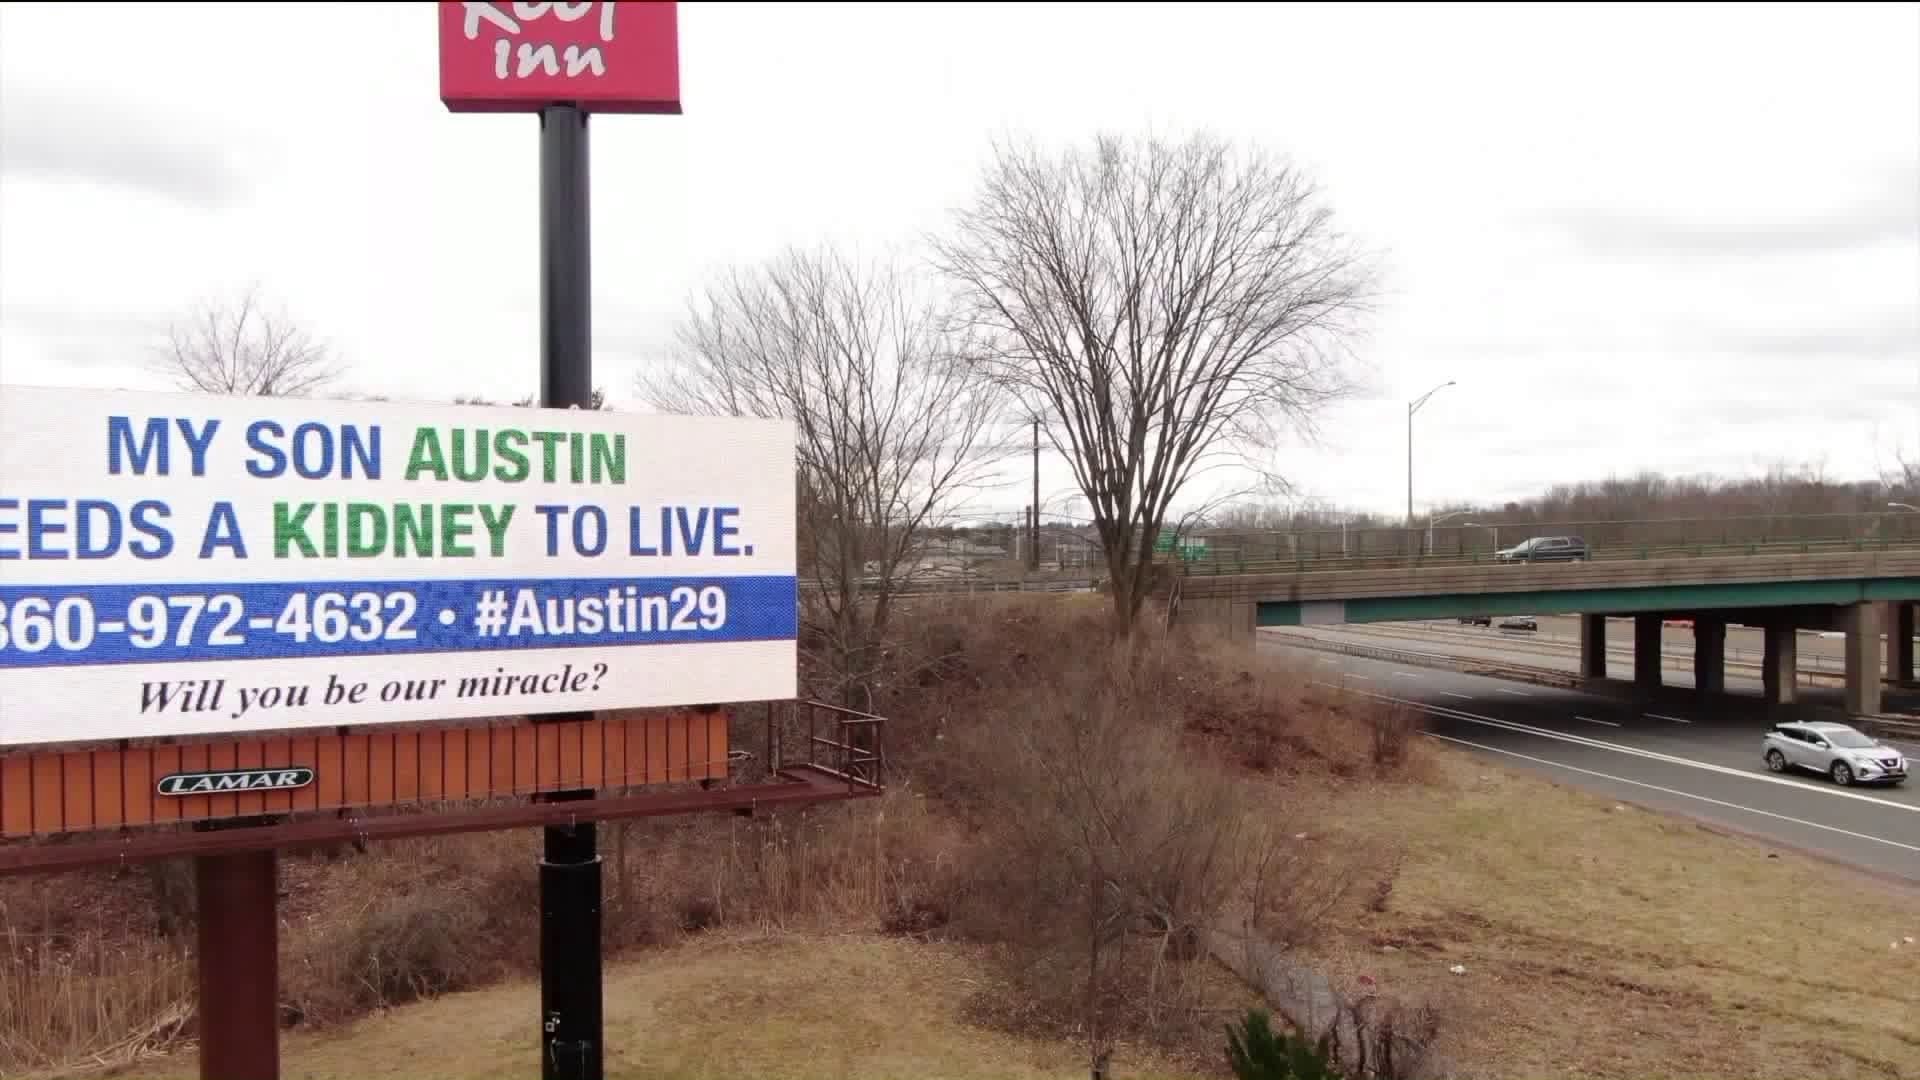 Willington mother gets billboard to search for kidney for her son